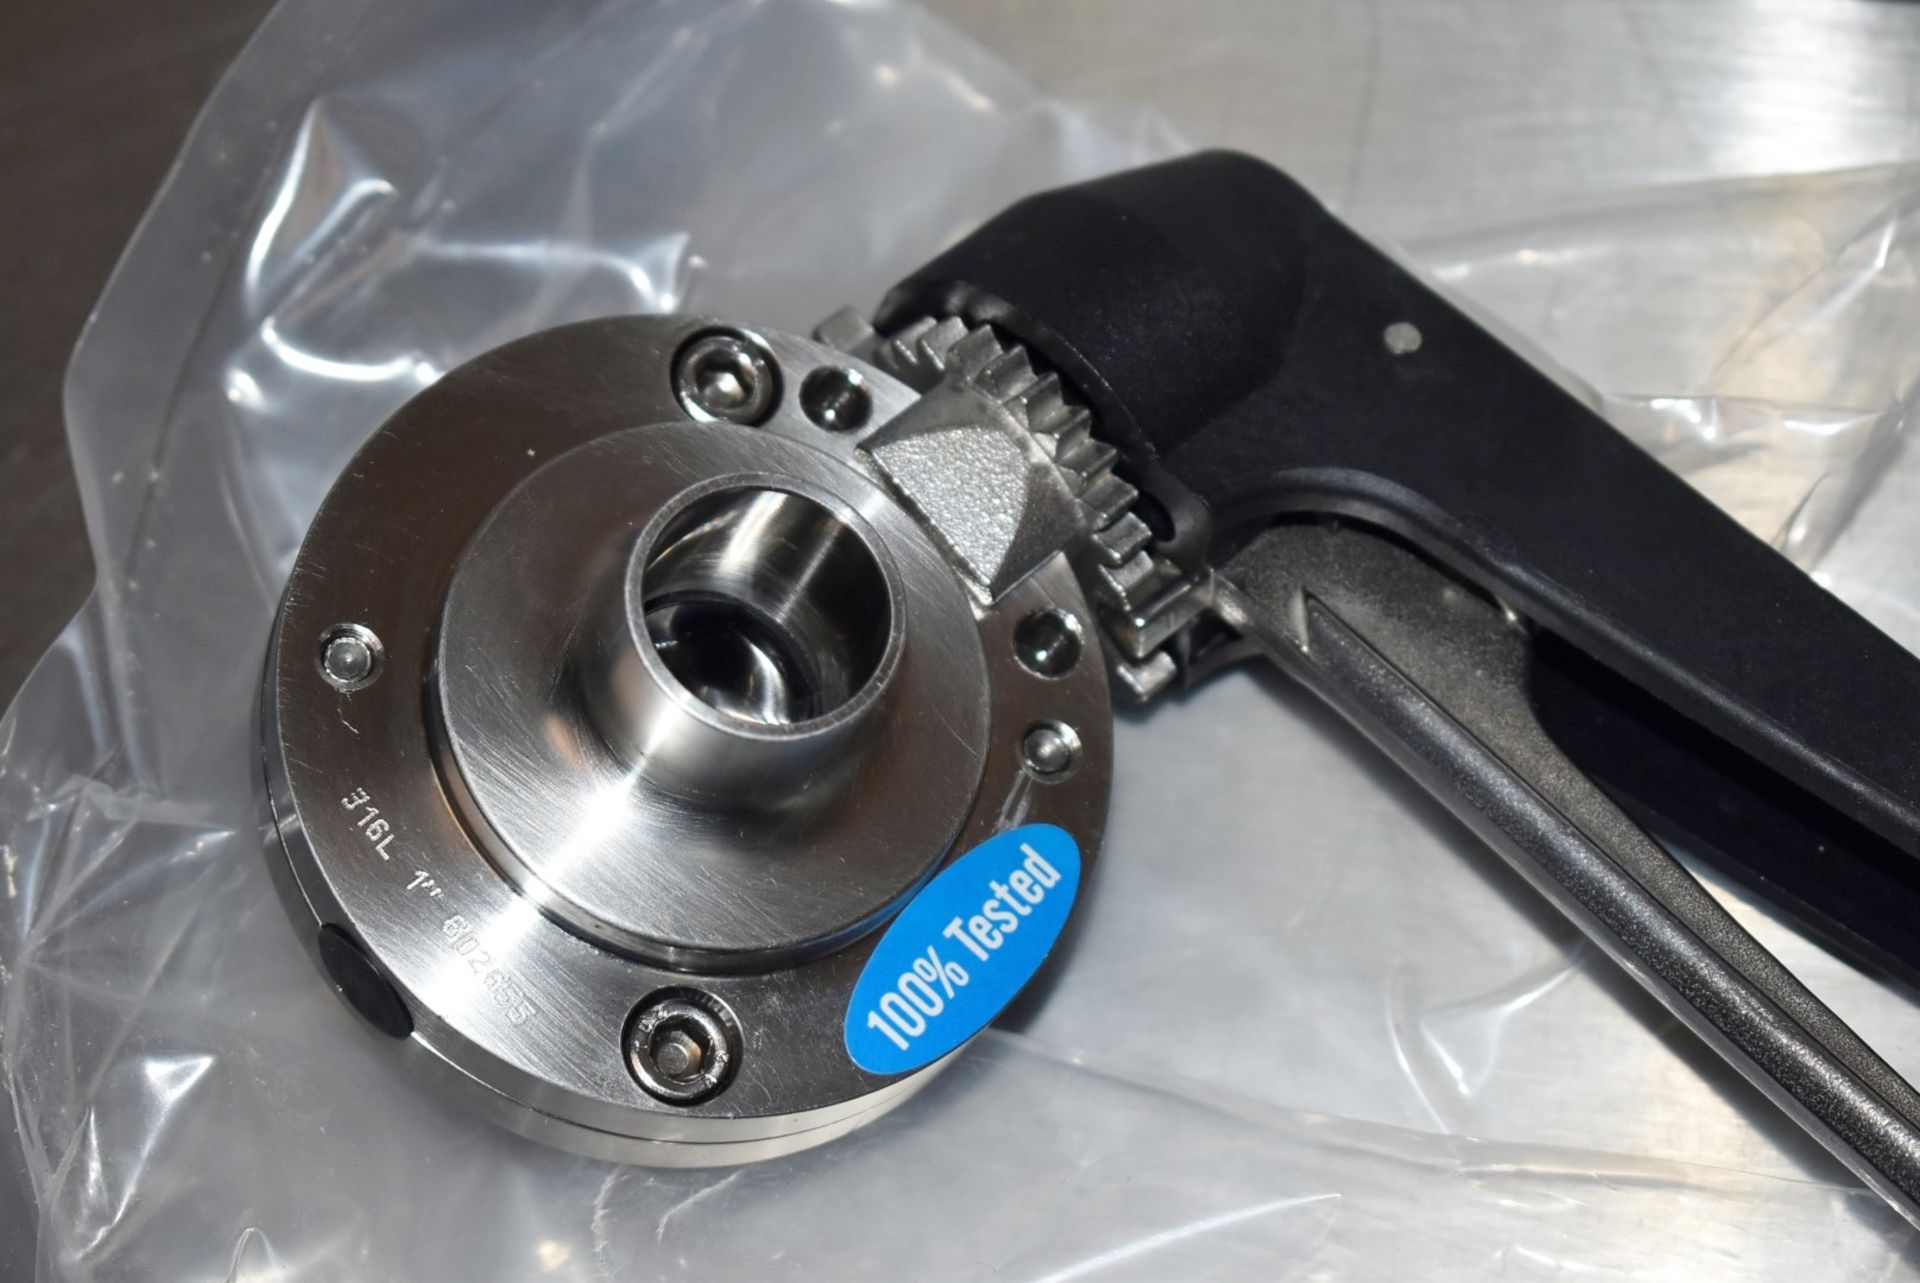 1 x Butterfly Valve - New in Original Box - Model: 3A - Material: 316L - Type: Weld - Size: 1 Inch - - Image 3 of 5